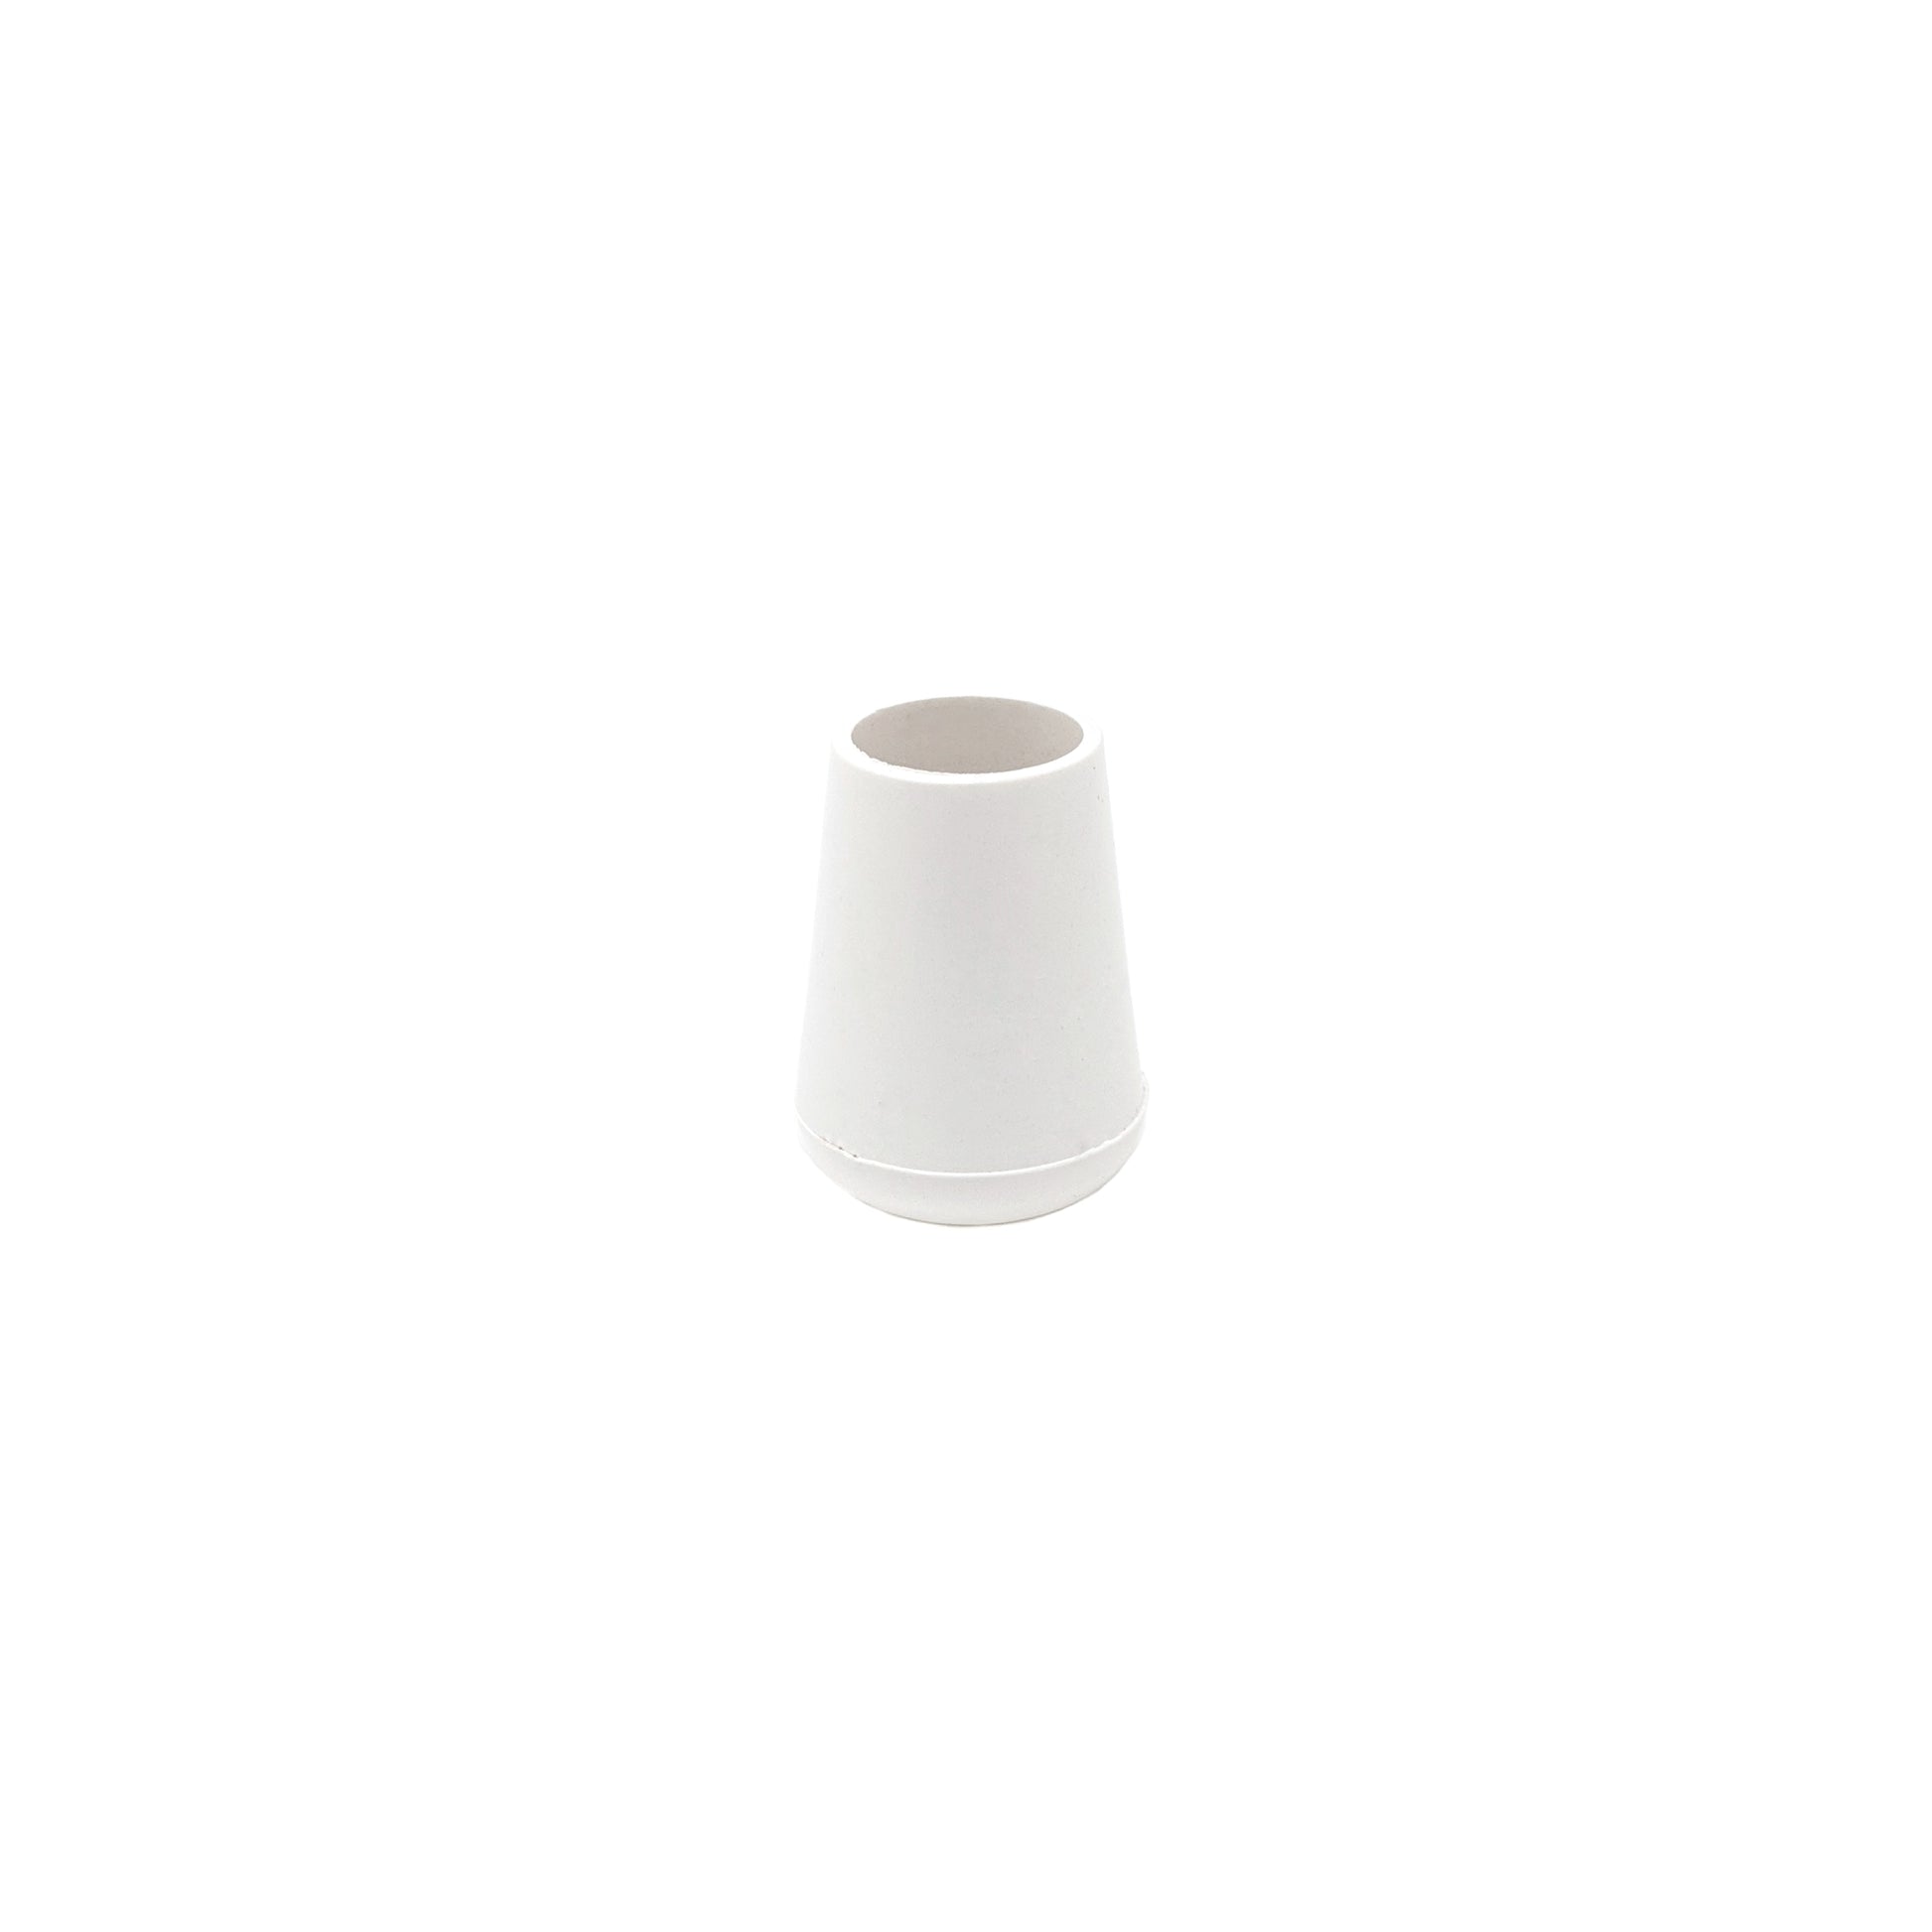 10mm White Rubber Ferrules with Steel Base Insert - Made in Germany - Keay Vital Parts